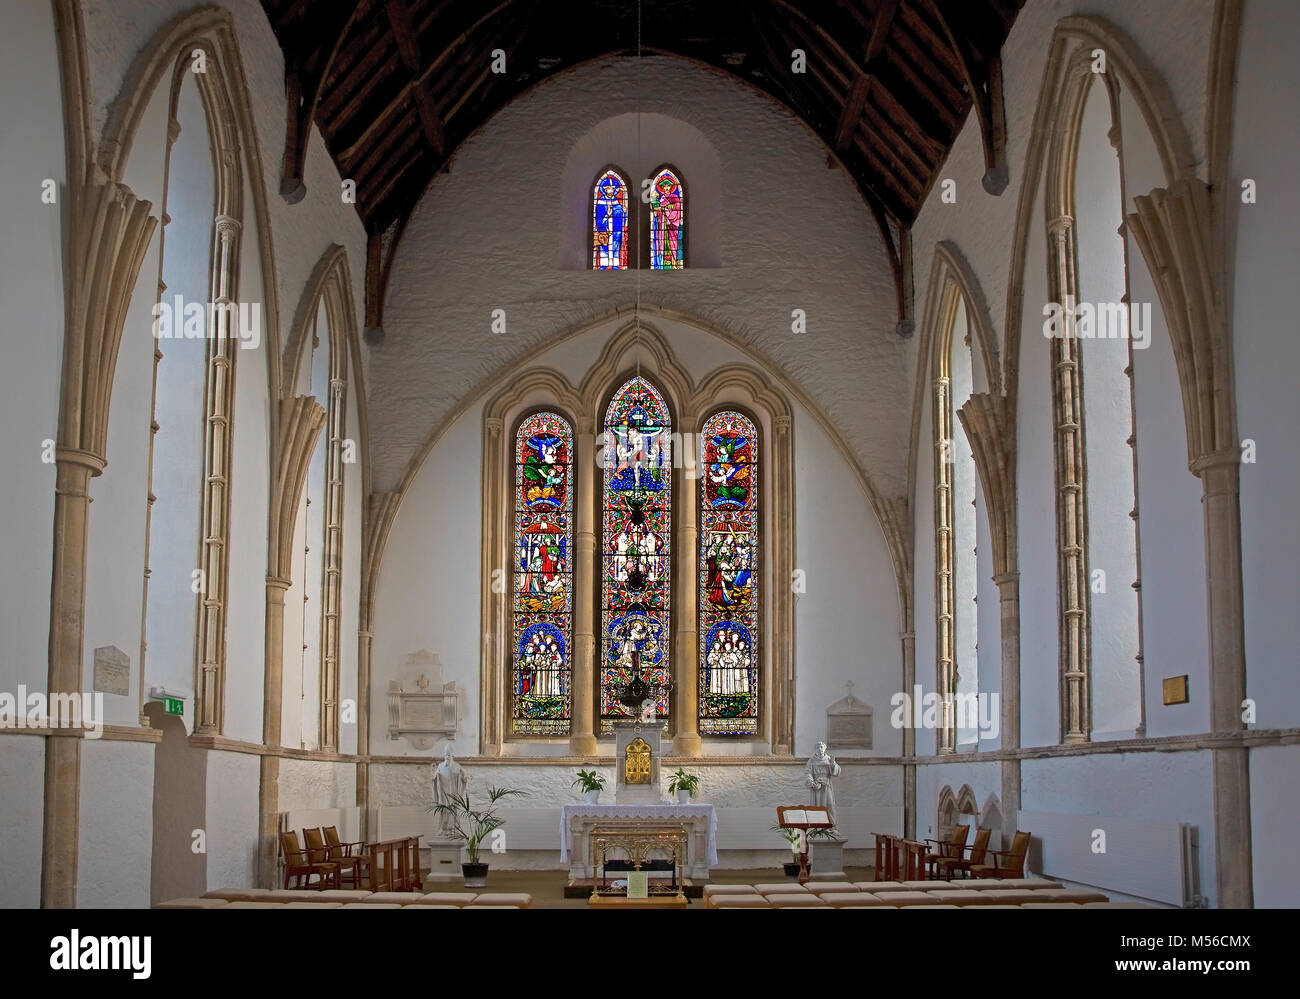 Stained Galss Windows in the Cistercian Duiske Abbey (1207), Renovated very sympathetically in 1980, Graiguenamanagh, County Kilkeeny, Ireland Stock Photo